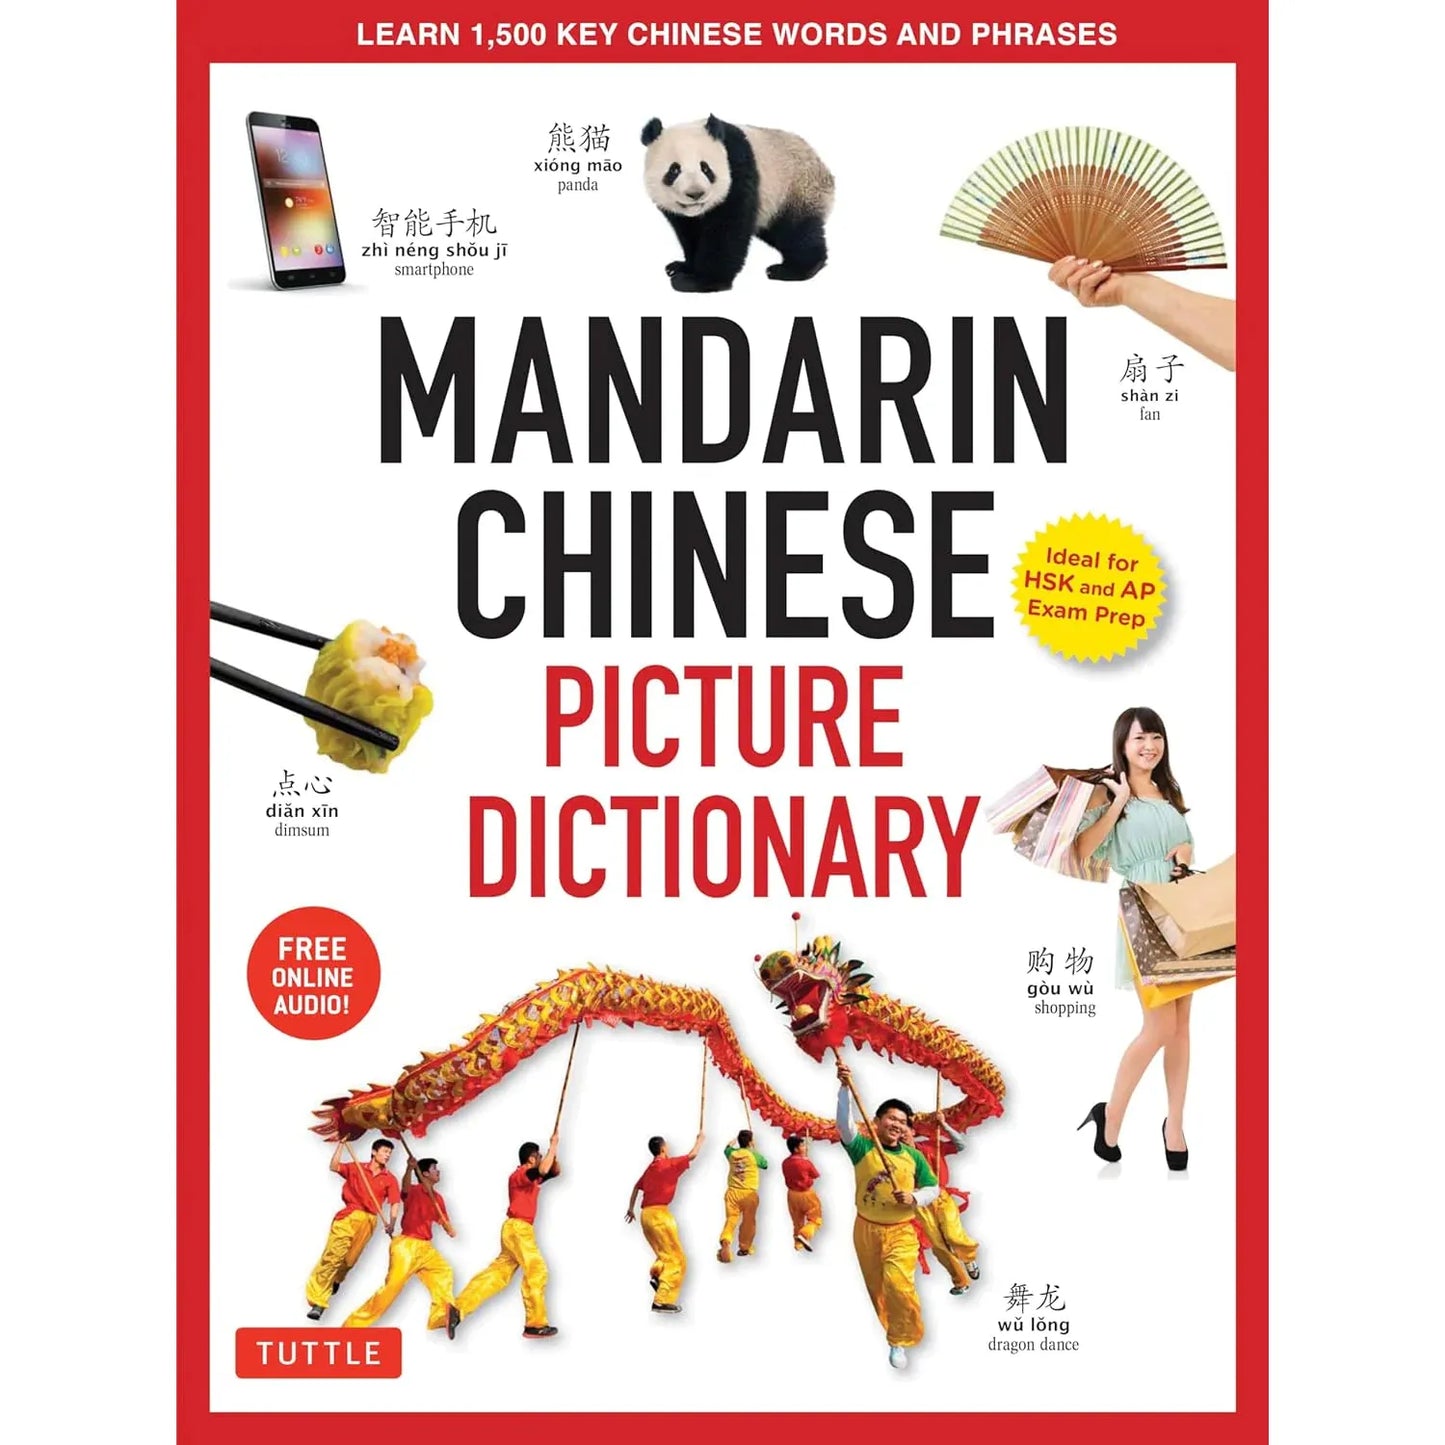 Mandarin Chinese Picture Dictionary - A Bilingual Learning Book